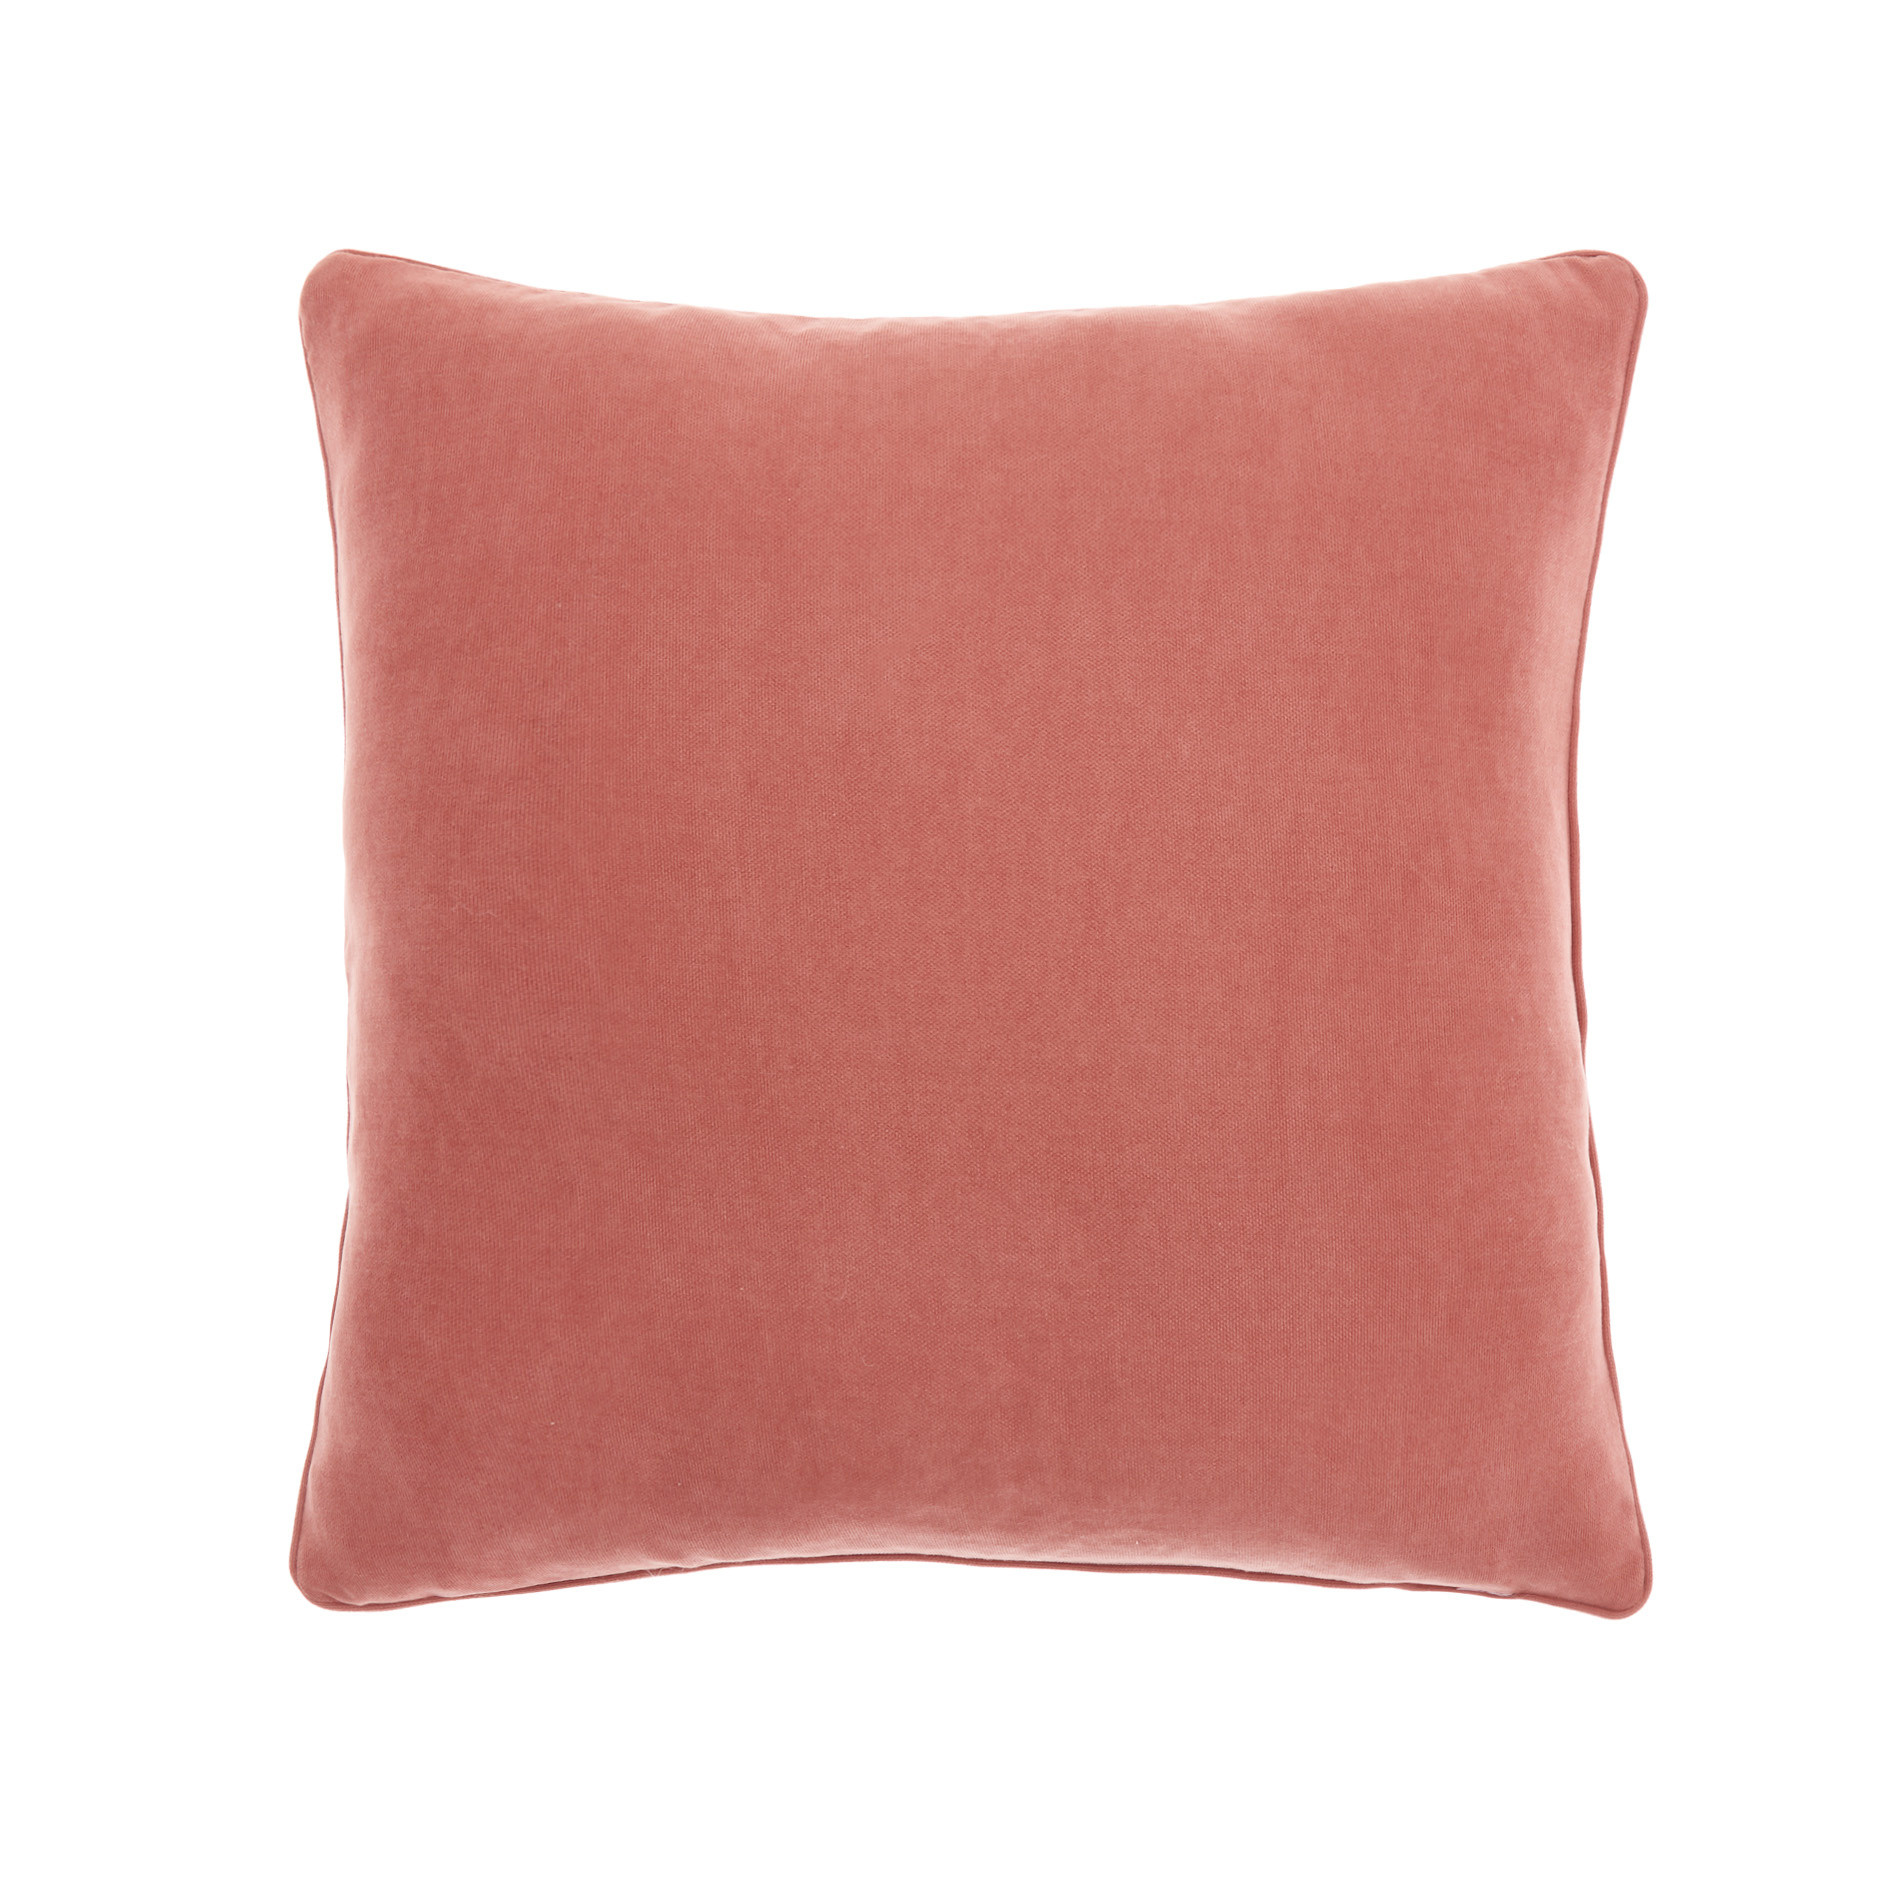 Patchwork-effetct cushion 45x45cm, Pink, large image number 1